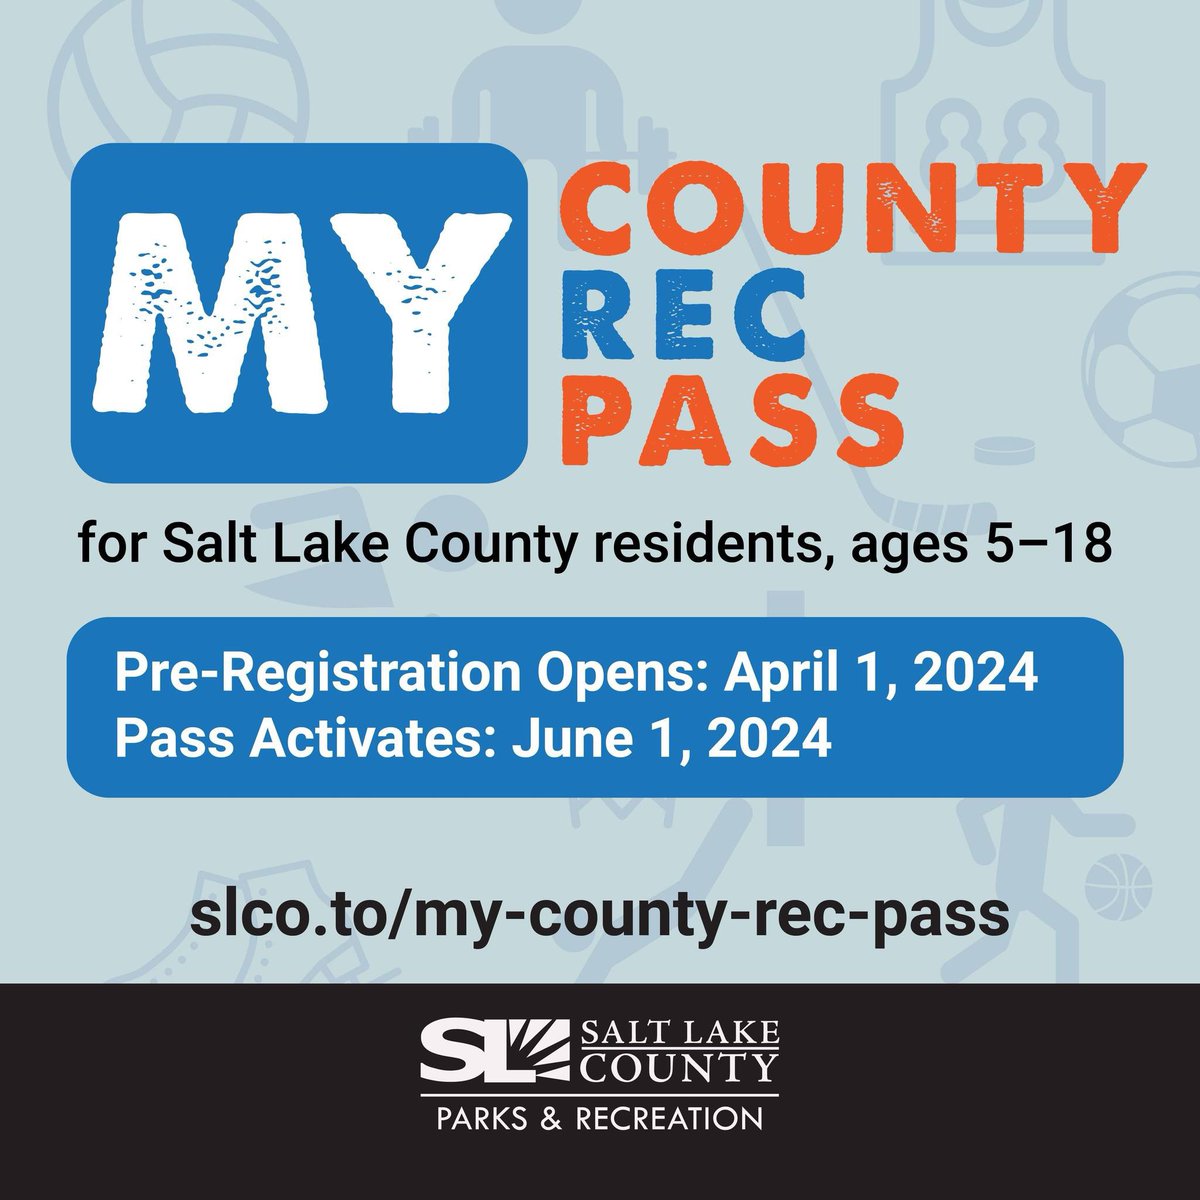 In an effort to help kids in Salt Lake County get off their devices, get more exercise, and connect as a family, we are giving FREE rec center passes to kids ages 5-18. #utpol #slco